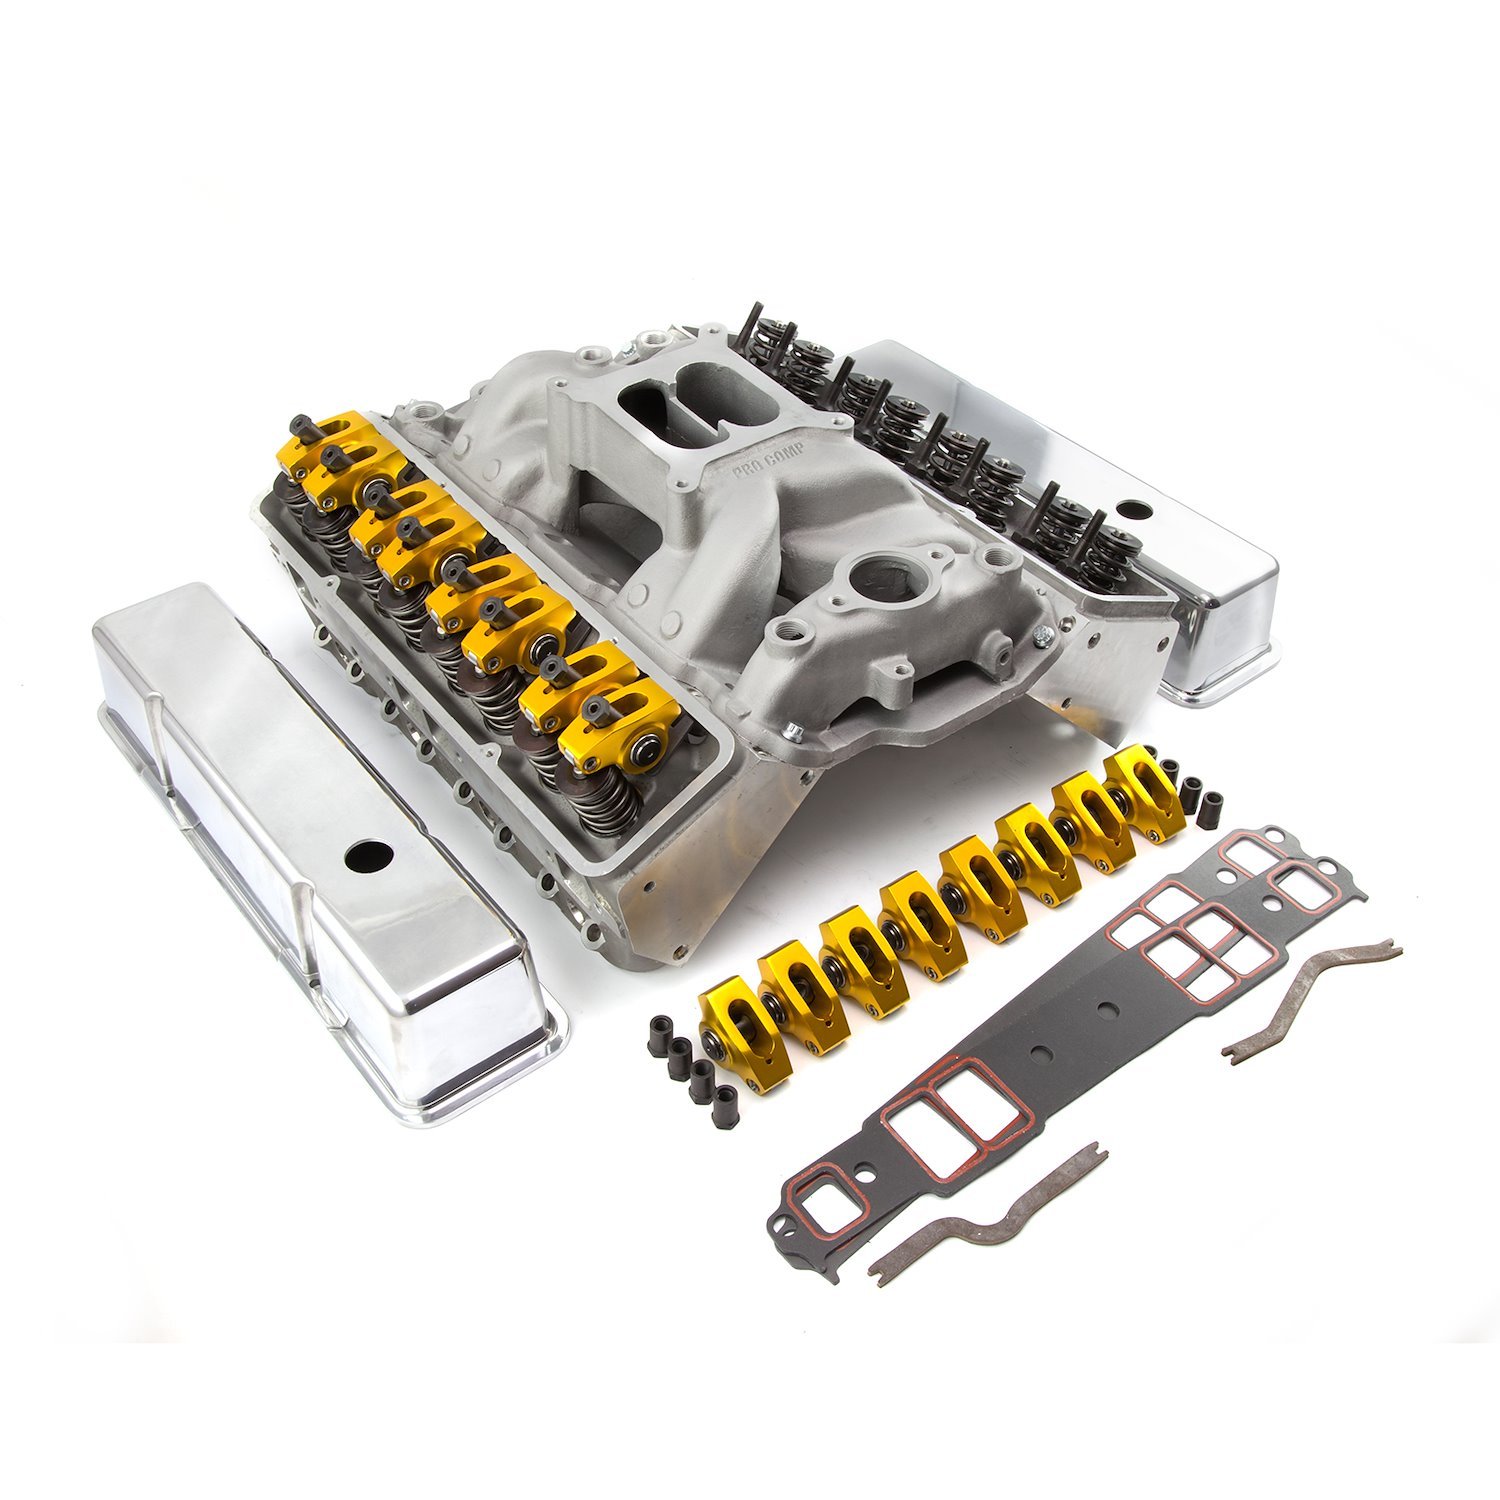 Top End Engine Kit Small Block Chevy 350/383/400, Straight-Plug, Hydraulic Roller